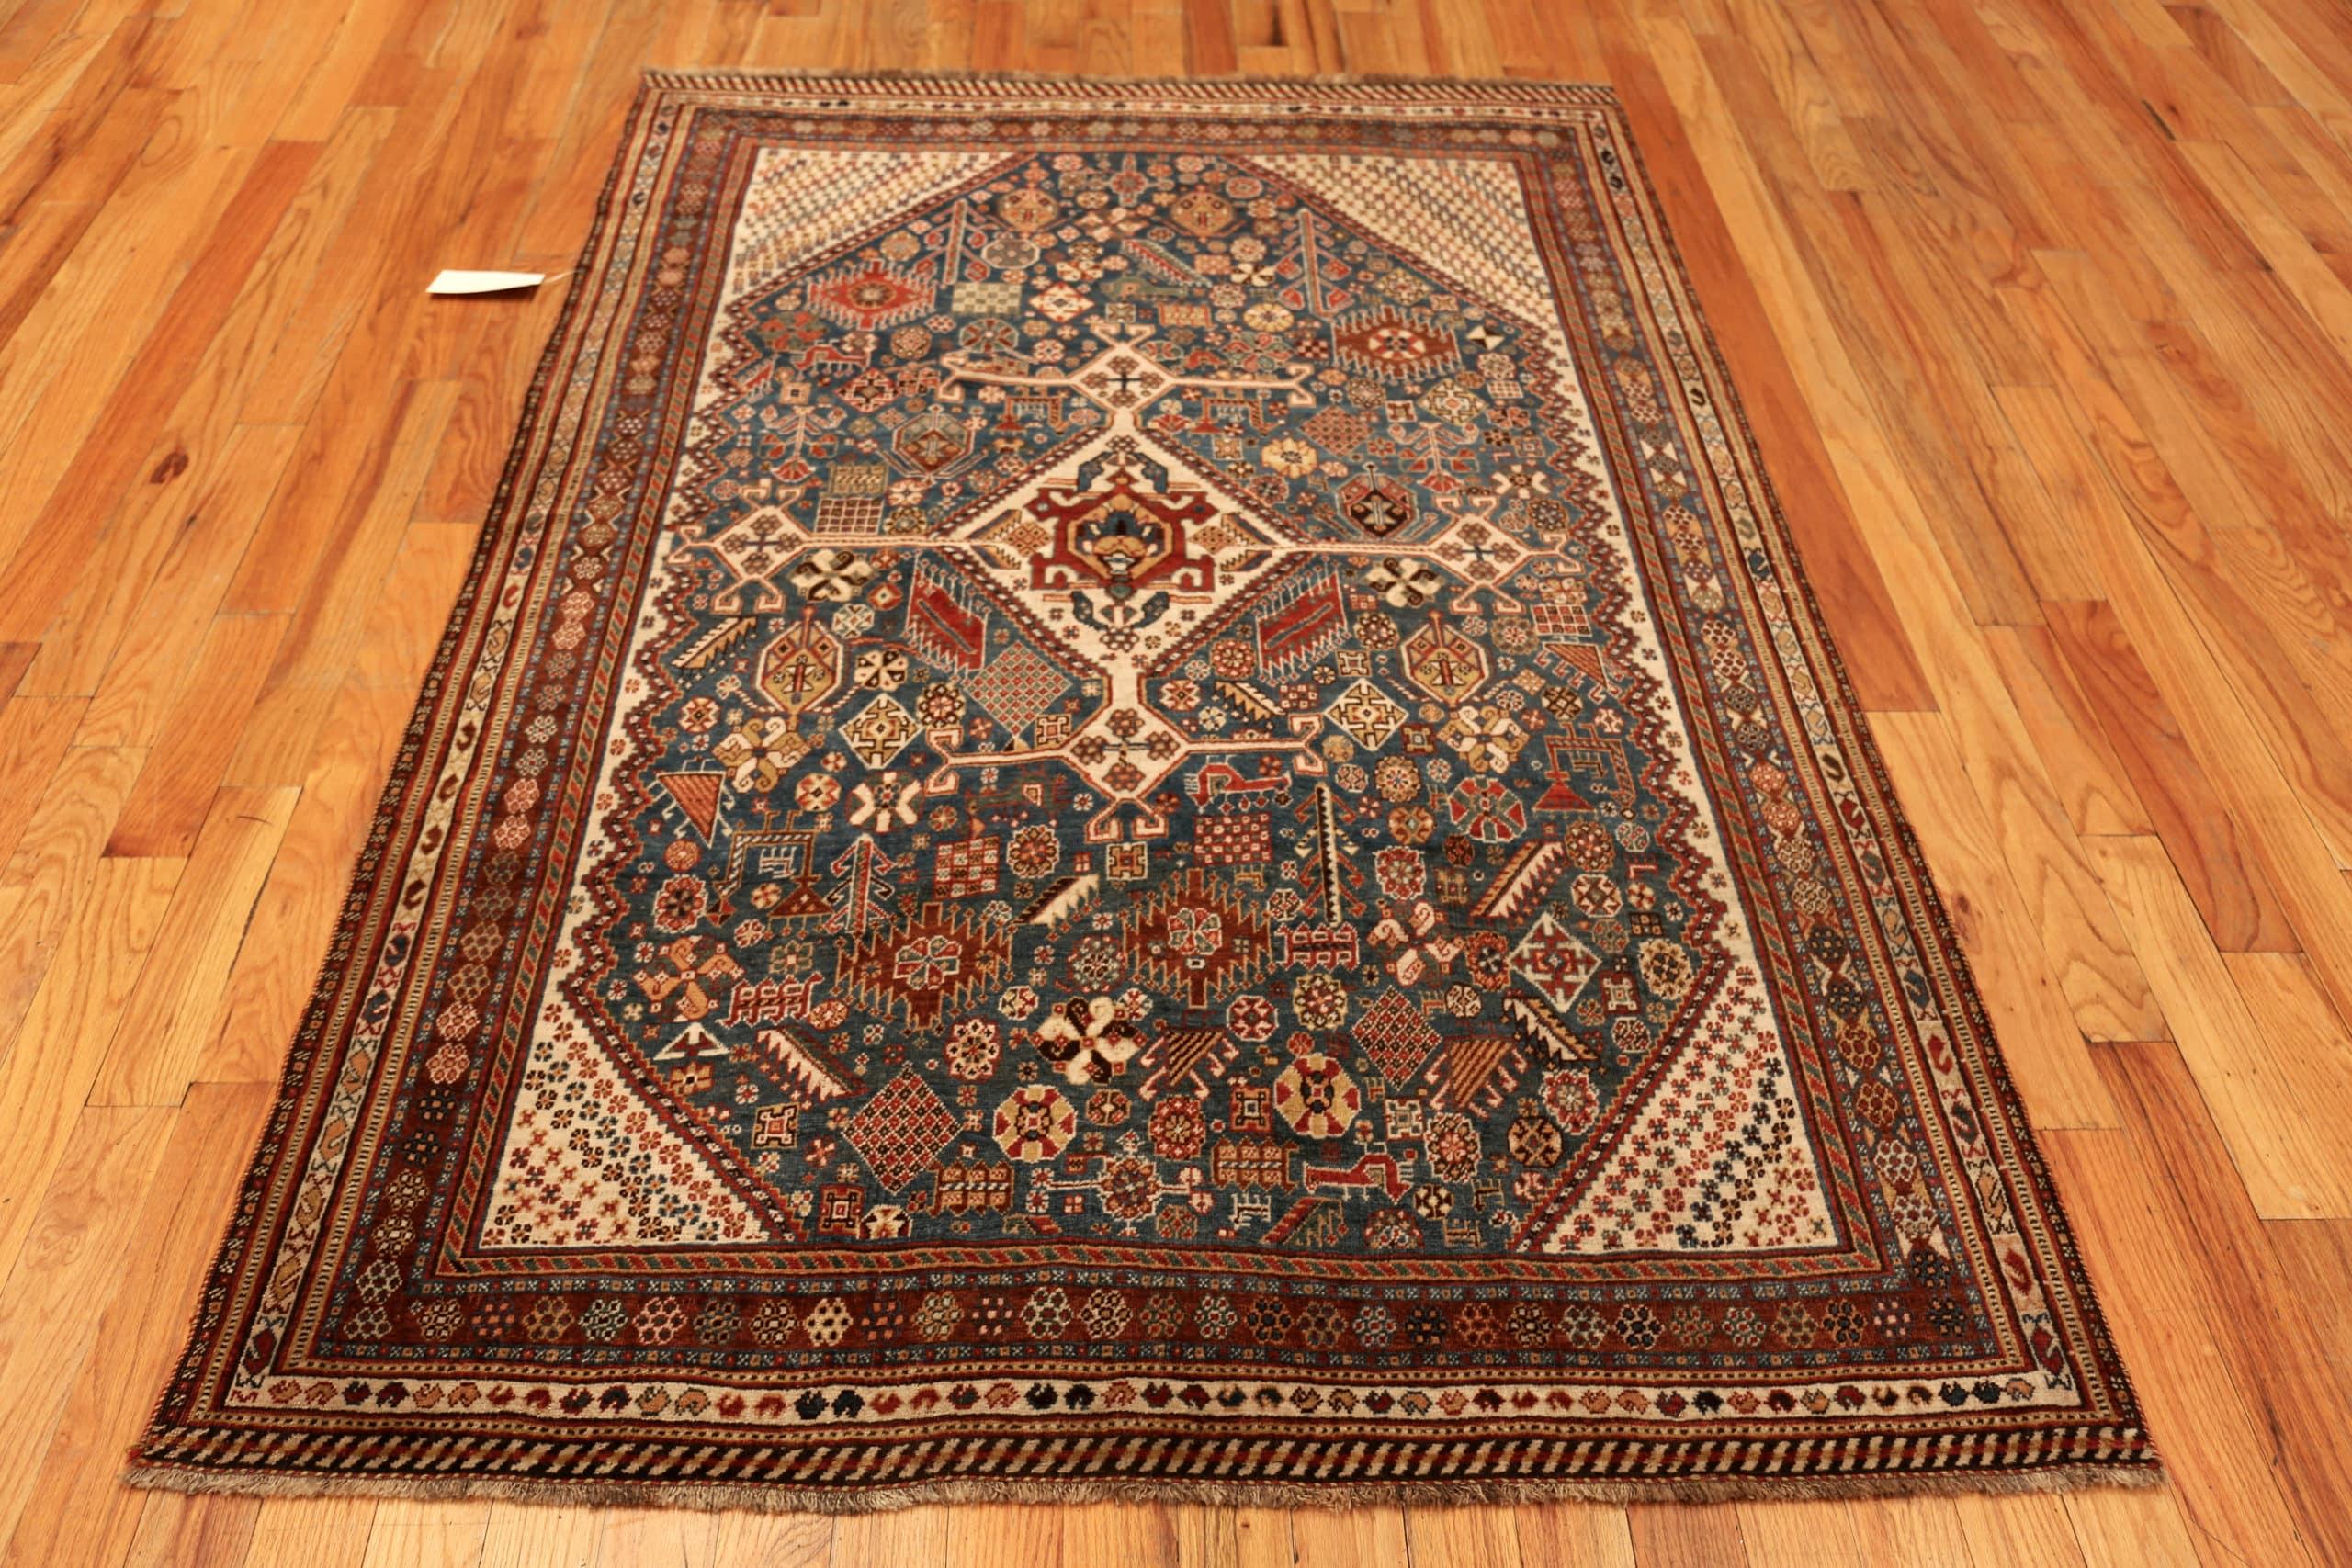 Nazmiyal Collection Antique Persian Qashqai Rug. Size: 4 ft 10 in x 7 ft 2 in 1